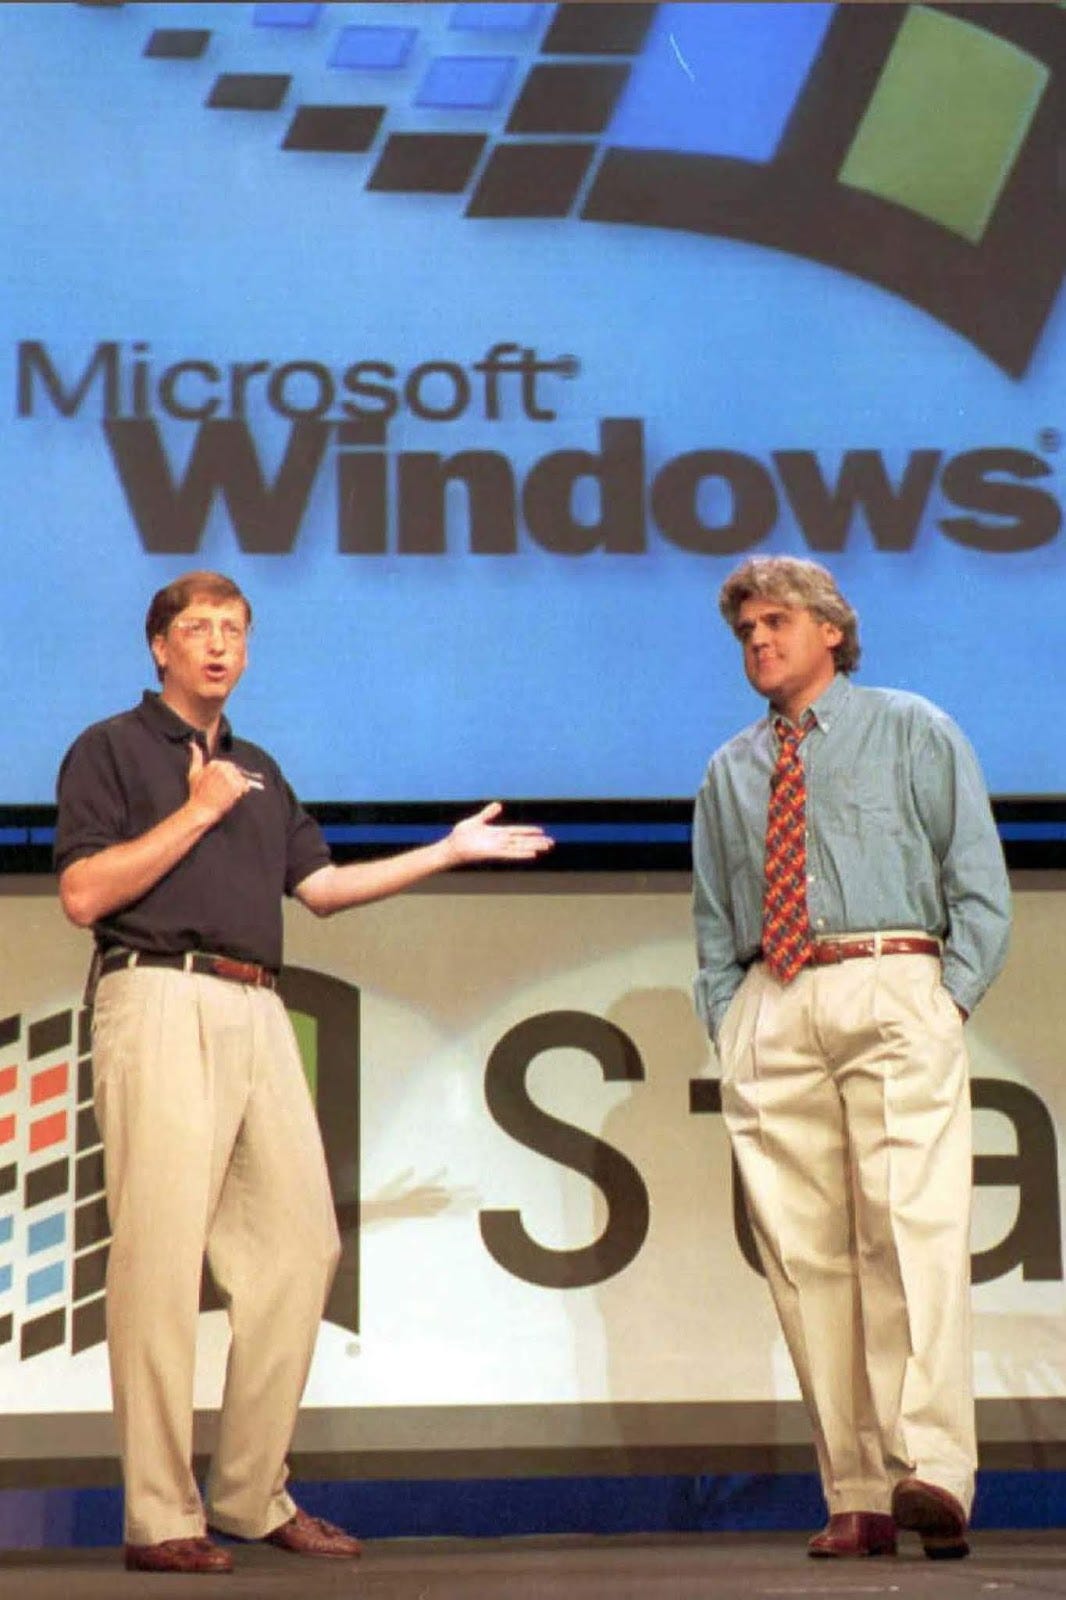 Bill Gates is joined by comedian Jay Leno at the Windows 95 kickoff event in Redmond, Washington.